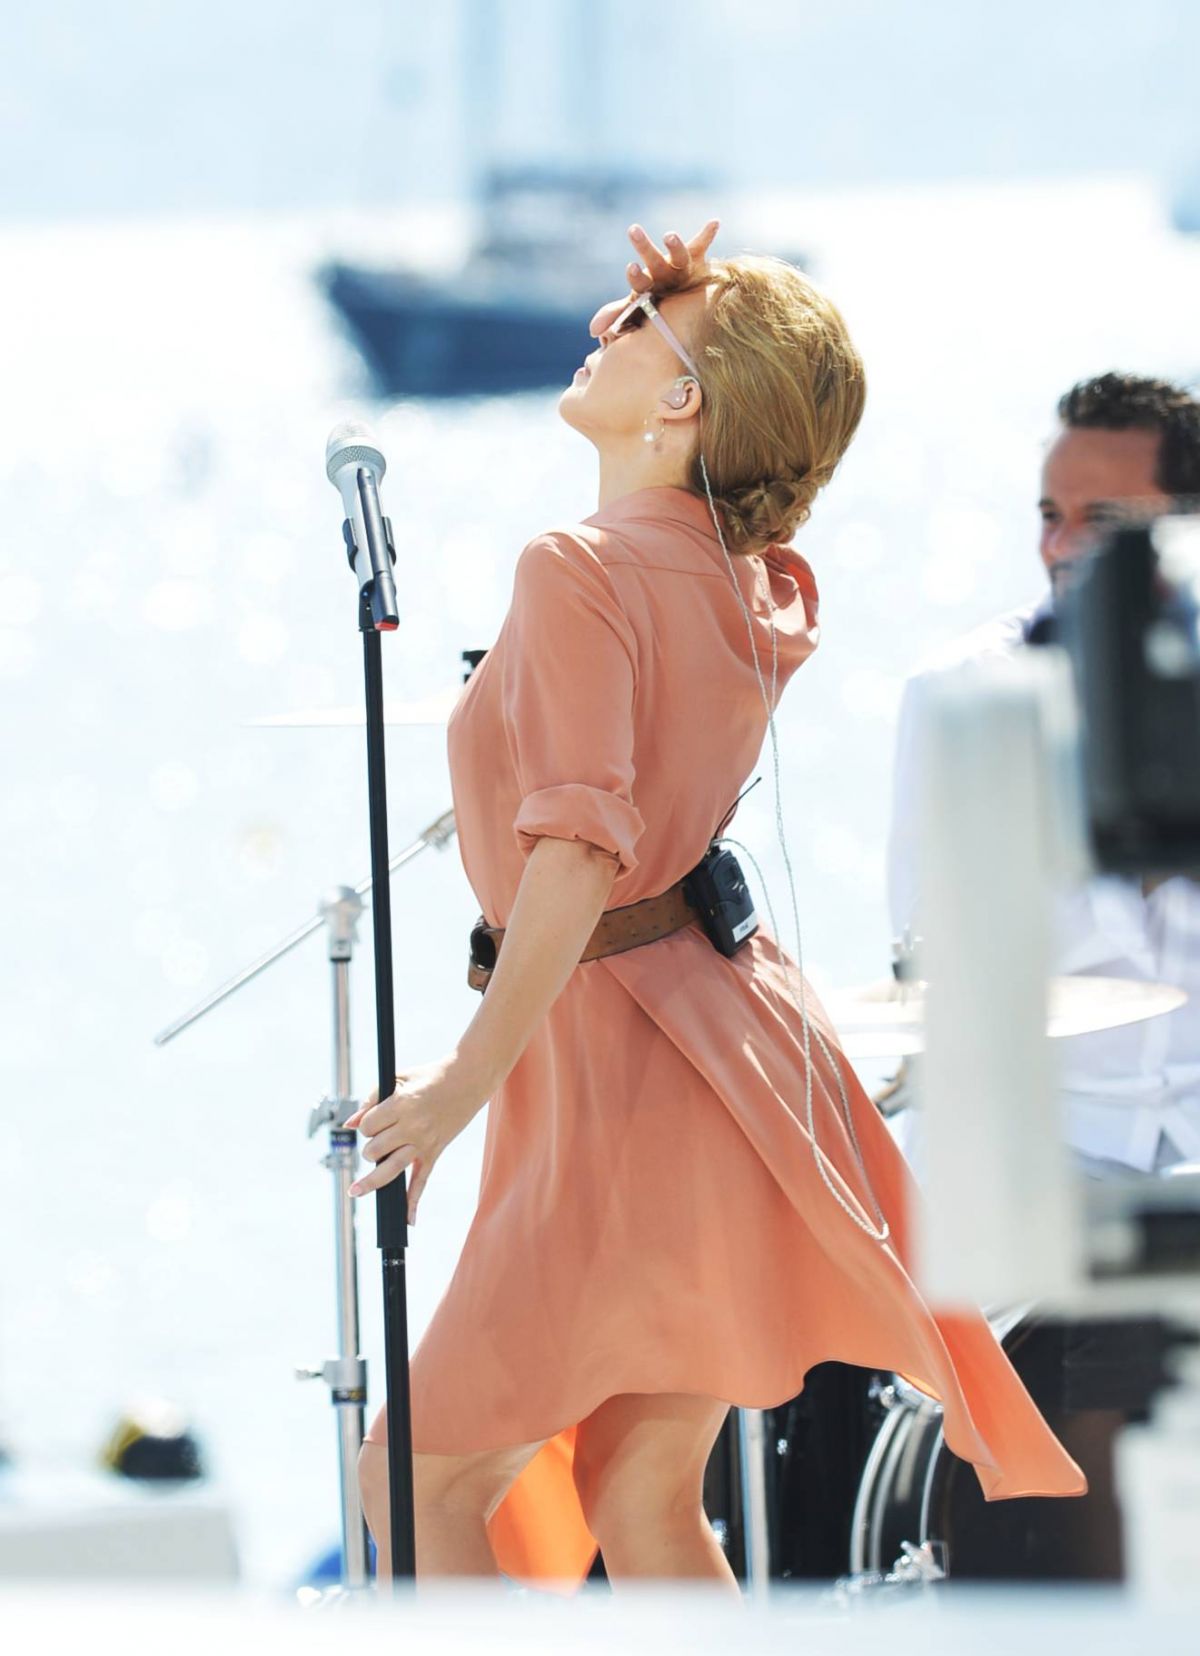 https://www.hawtcelebs.com/wp-content/uploads/2014/05/kylie-minogue-performs-at-stage-of-canal-in-cannes_9.jpg